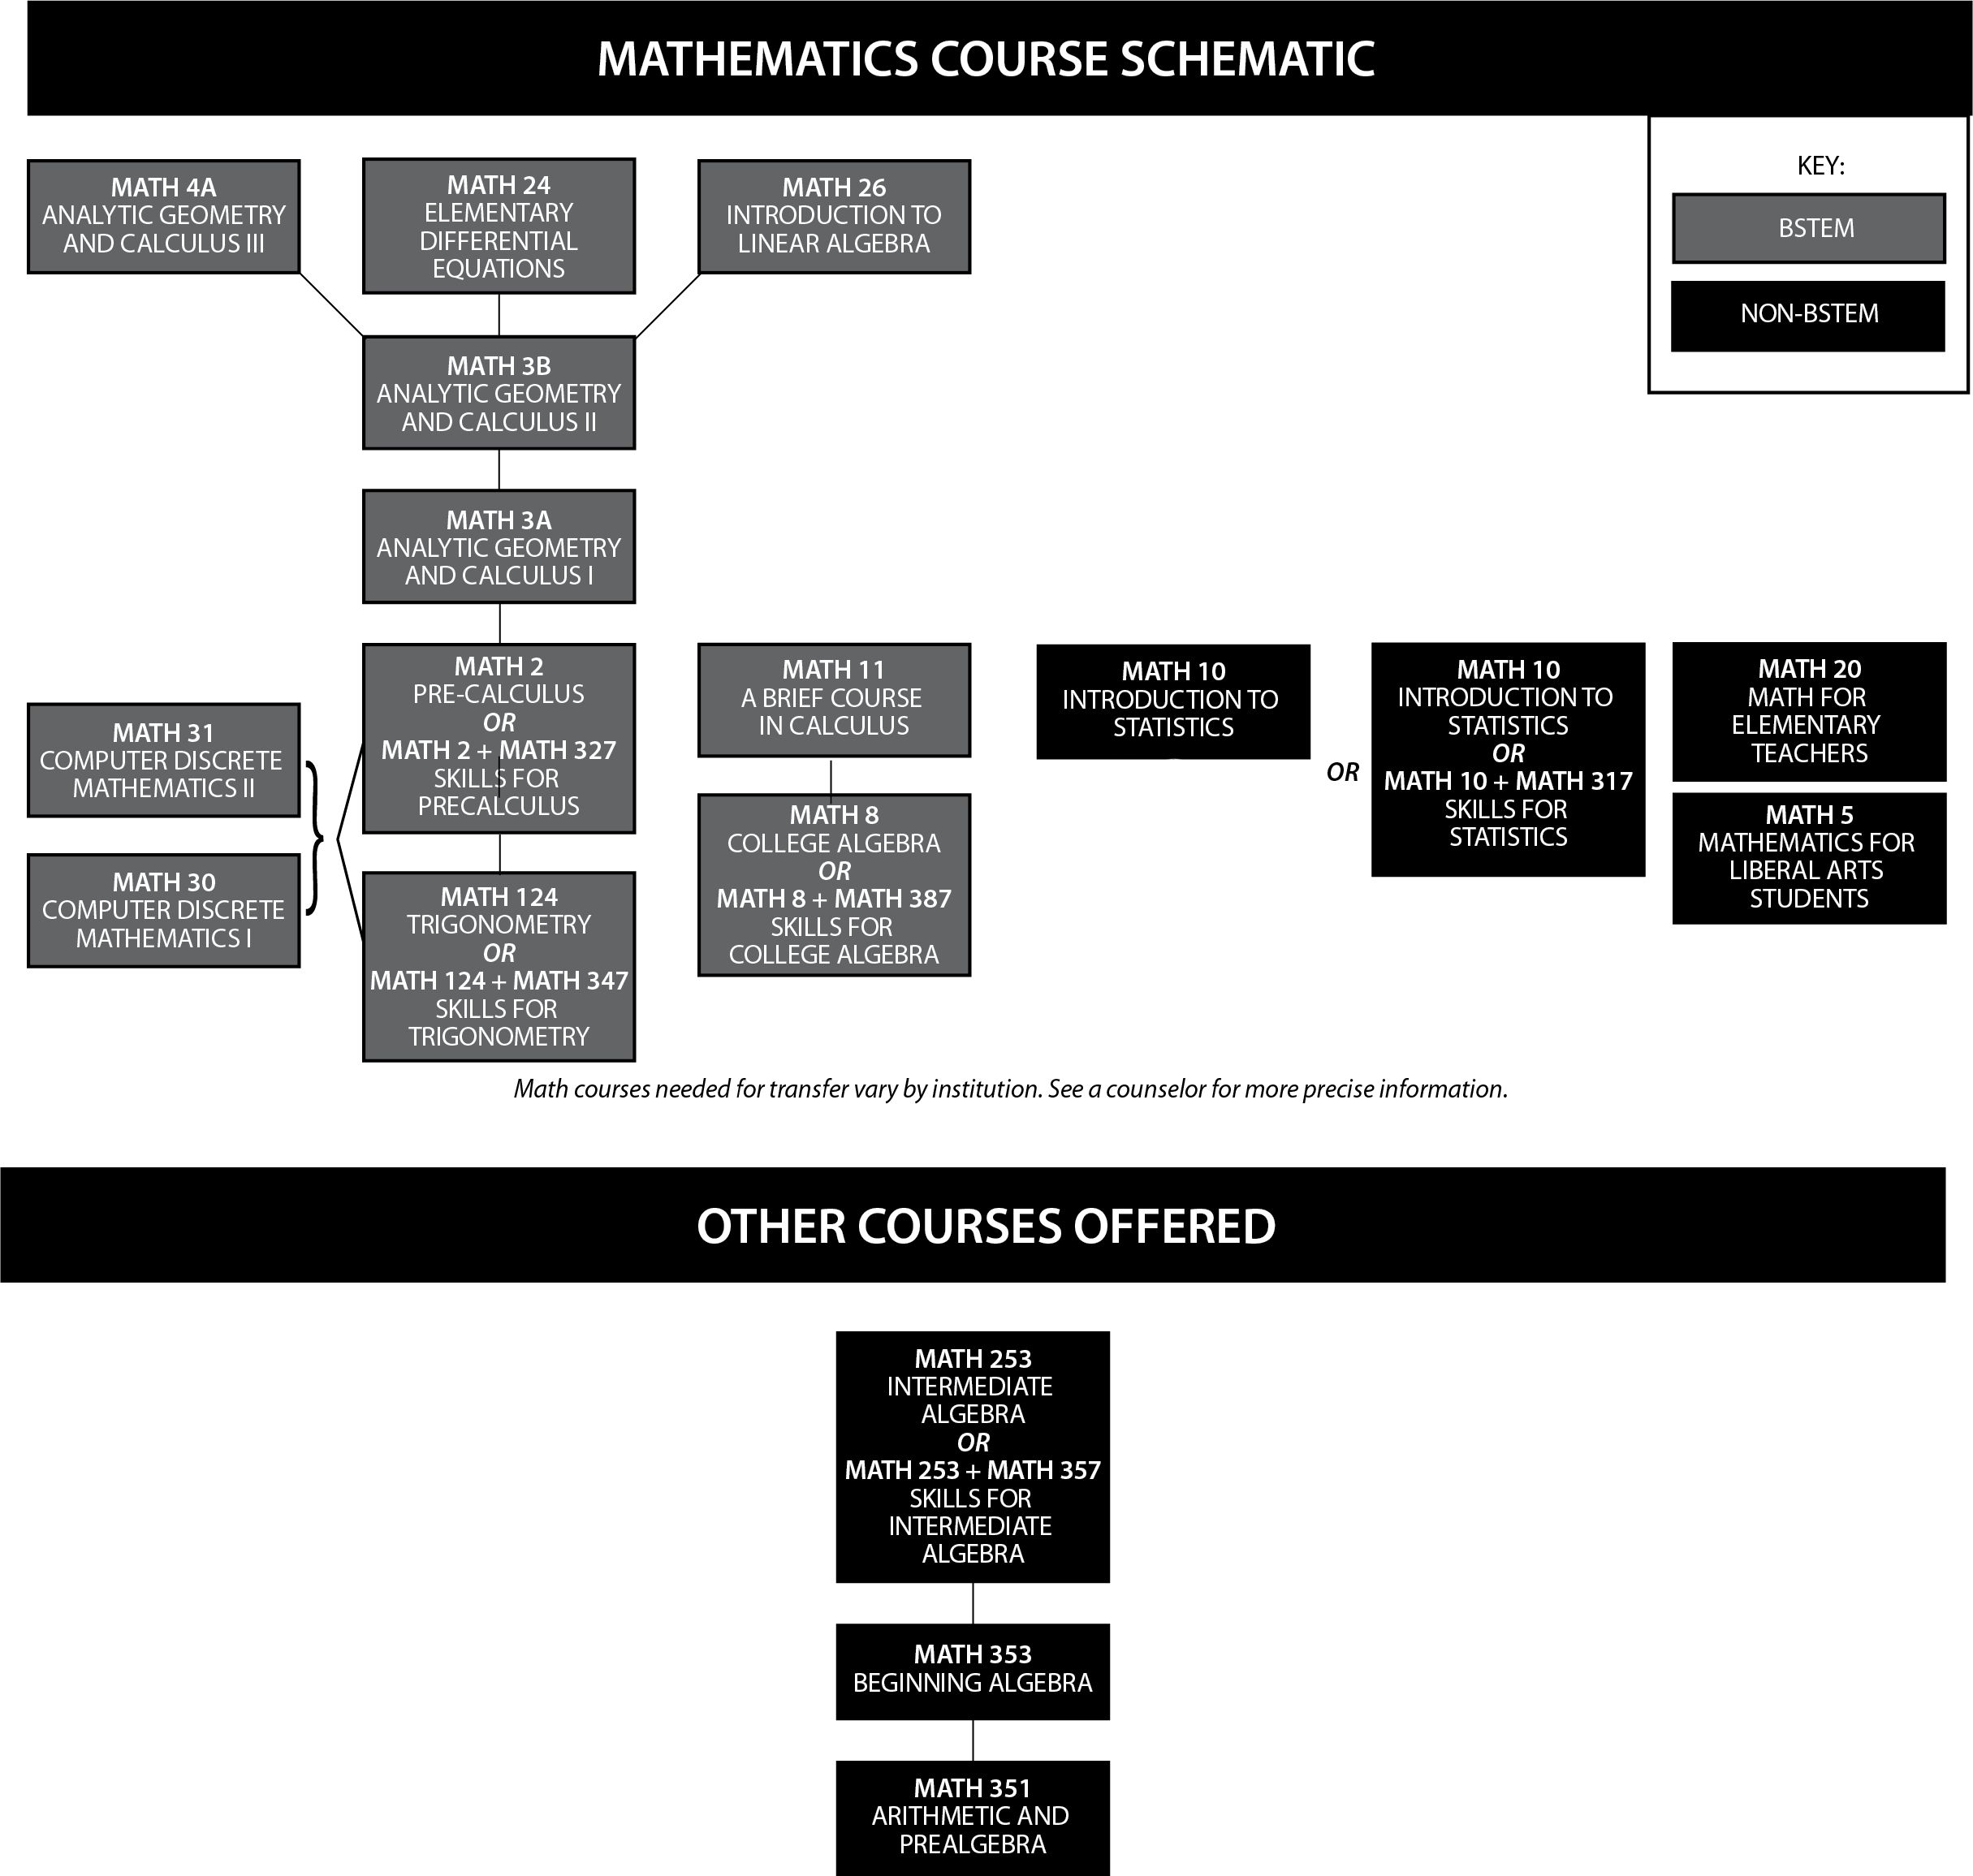 Graphical chart showing the mathematics course schematic. The chart shows the following: There are four developmental math courses. MSS 325, Basic Arithmetic Skills, and MATH 350, Math Modules, are standalone courses. MATH 351, Arithmetic Review and Pre-Algebra, leads to MATH 310, Pre-Statistics, which leads to MATH 10, Introduction to Statistics. MATH 351 also leads to MATH 353, Elementary Algebra, which leads to MATH 253, Intermediate Algebra. From MATH 253, students may take MATH 10; MATH 5, Mathematics for Liberal Arts Students; MATH 20, Math for Elementary Teachers. MATH 310, MATH 10, MATH 5 and MATH 20 are all liberal arts math courses. MATH 253 also leads to MATH 8, College Algebra, which leads to MATH 11, A Brief Course in Calculus. MATH 8 and MATH 11 are business math courses. MATH 253 also leads to MATH 124, Trigonometry. MATH 124 leads to MATH 2, Pre-Calculus, which leads to both MATH 30, Computer Discrete Mathematics 1, and MATH 31, Computer Discrete Mathematics 2. MATH 2 also leads to MATH 3A, Analytic Geometry and Calculus 1, which leads to MATH 3B, Analytic Geometry and Calculus 2. MATH 3B leads to MATH 4A, Analytic Geometry and Calculus 3, or to MATH 24, Elementary Differential Equations, or MATH 26, Introduction to Linear Algebra. MATH 124, MATH 2, MATH 30, MATH 31, MATH 3A, MATH 3B, MATH 4A, MATH 24 and MATH 26 are all STEM courses. MATH 253 may be used for AA degree credit. MATH 124 may be used for CSU transfer articulation. The following courses may be used for CSU and UC transfer articulation: MATH 4A, MATH 24, MATH 26, MATH 3B, MATH 3A, MATH 2, MATH 31, MATH 30, MATH 11, MATH 8, MATH 20, MATH 5, and MATH 10. Math courses needed for transfer vary by institution. See a counselor for more precise information.